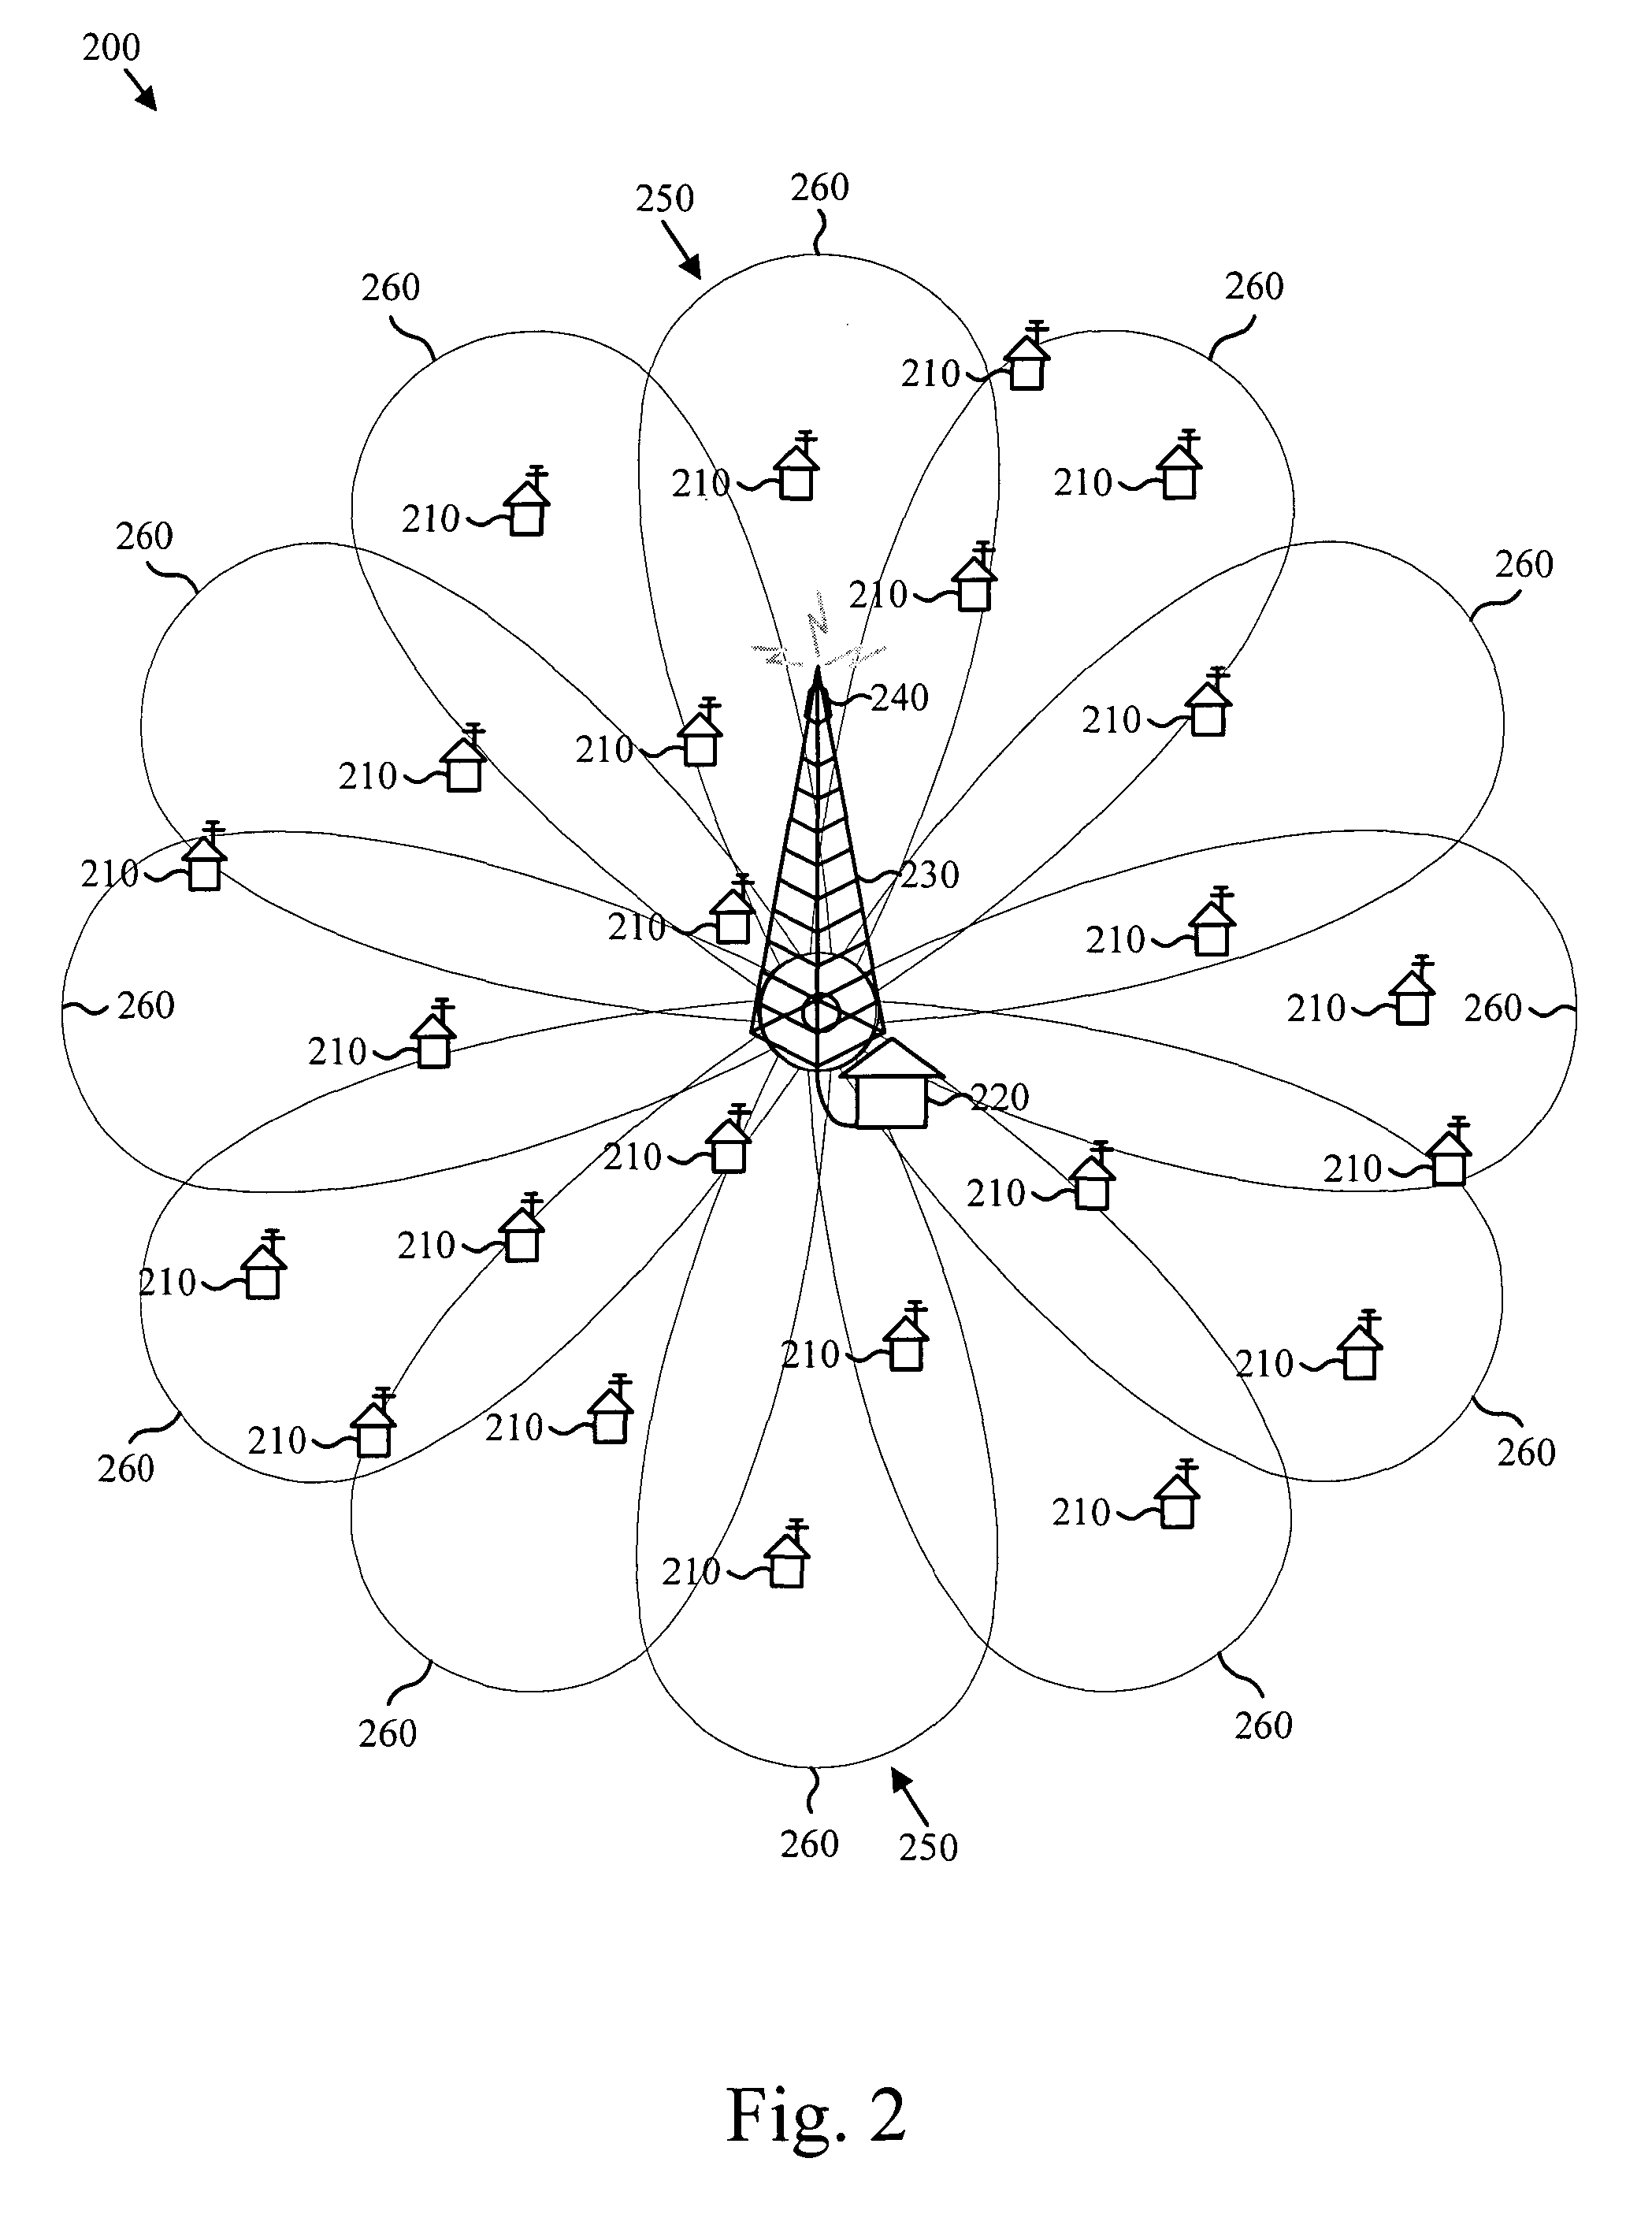 Apparatus method and system for providing enhanced digital services using an analog broadcast license